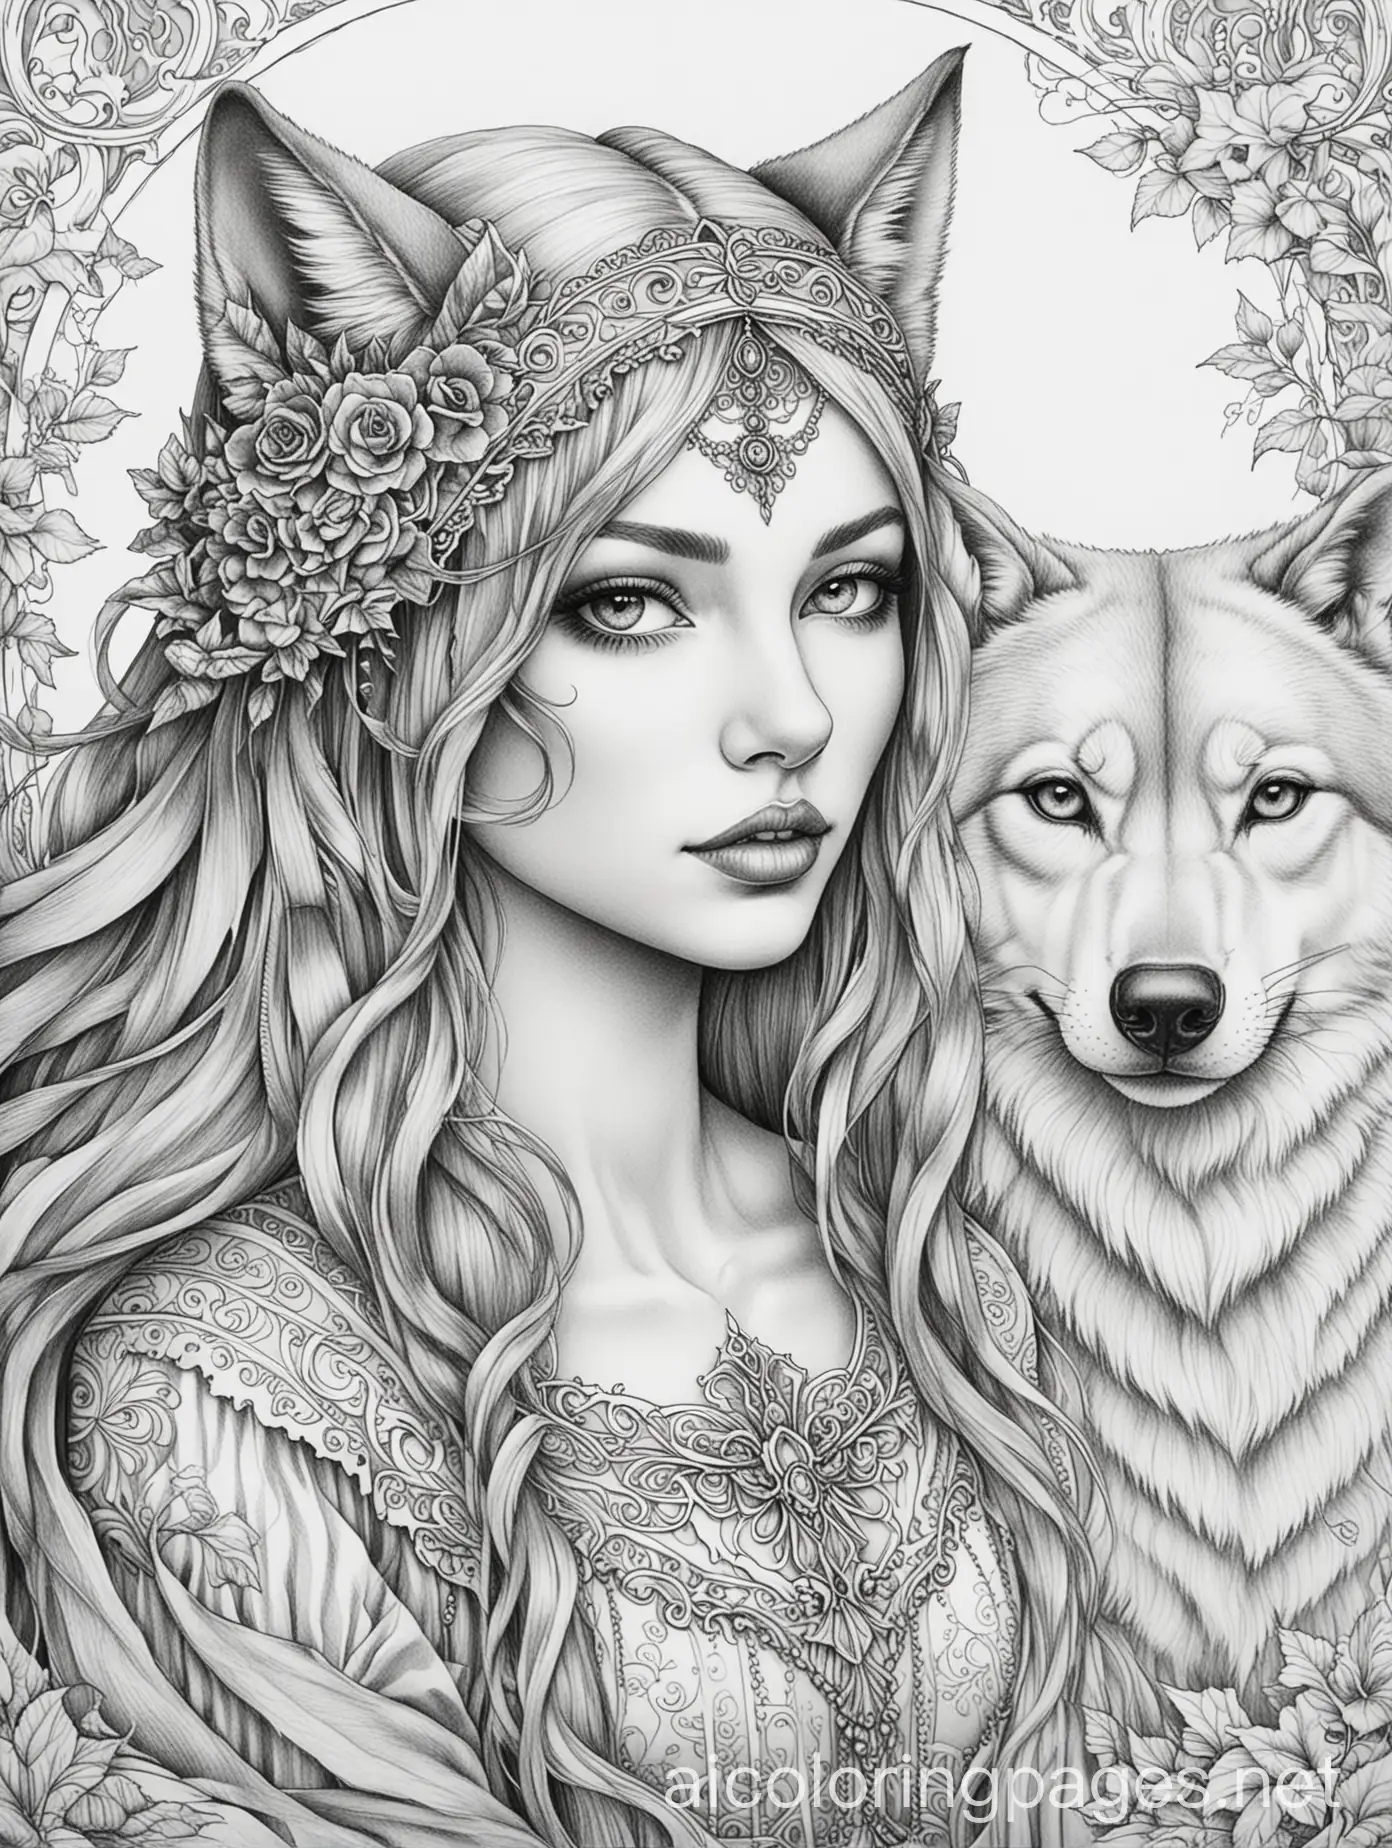 wolf and gothic lady adult colouring book, Coloring Page, black and white, line art, white background, Simplicity, Ample White Space. The background of the coloring page is plain white to make it easy for young children to color within the lines. The outlines of all the subjects are easy to distinguish, making it simple for kids to color without too much difficulty